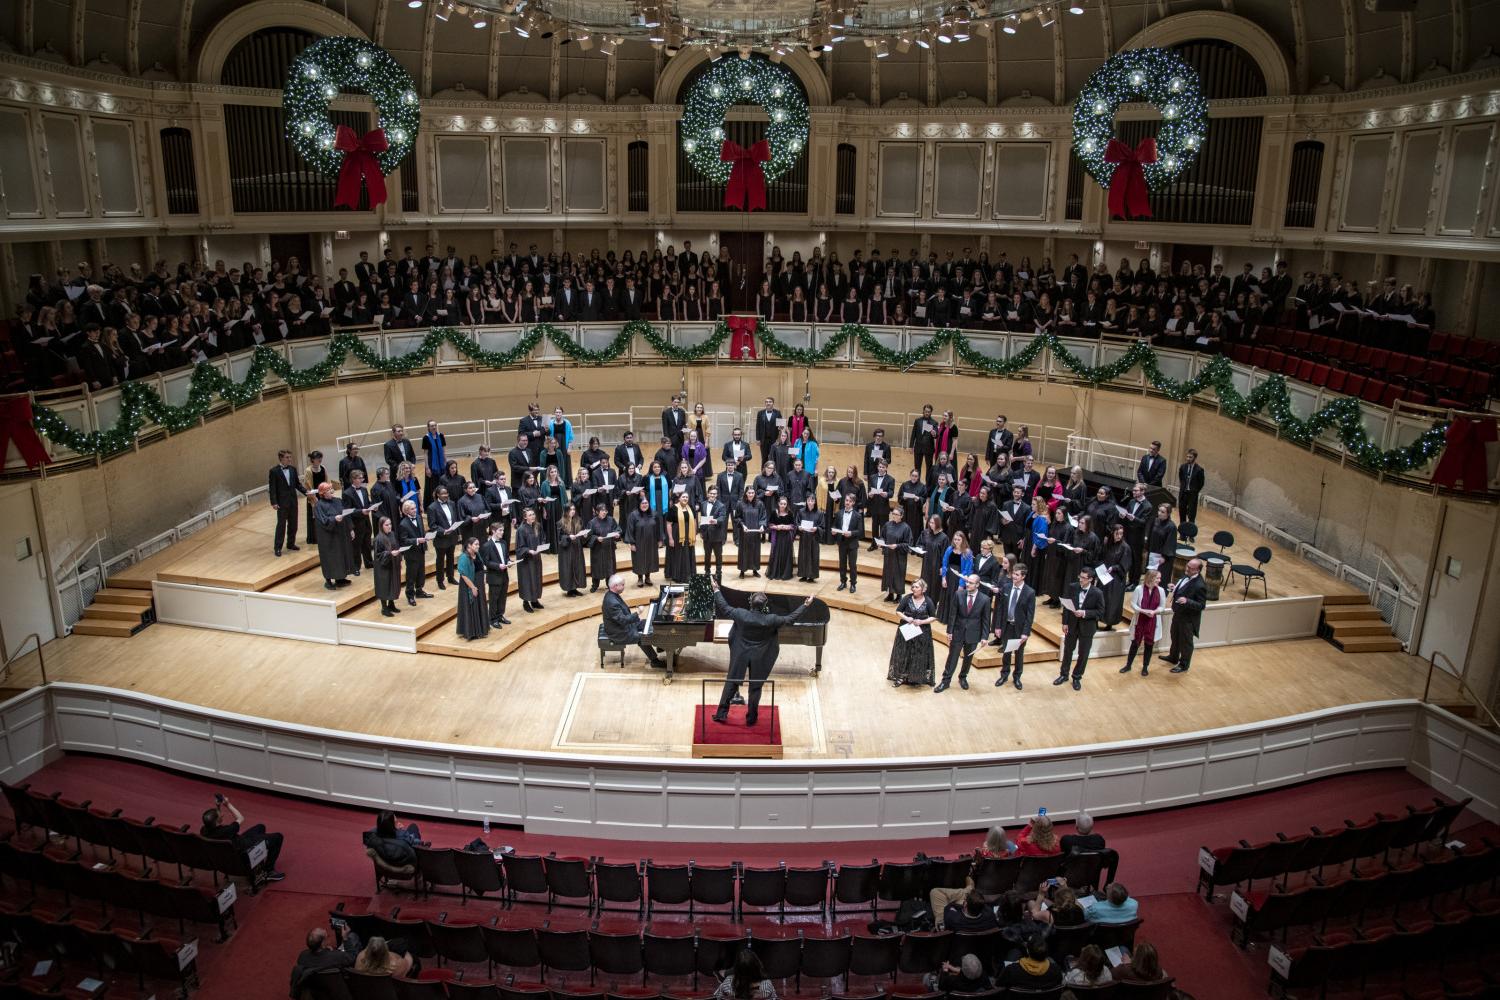 The <a href='http://e82pxx.lcxjj.net'>bv伟德ios下载</a> Choir performs in the Chicago Symphony Hall.